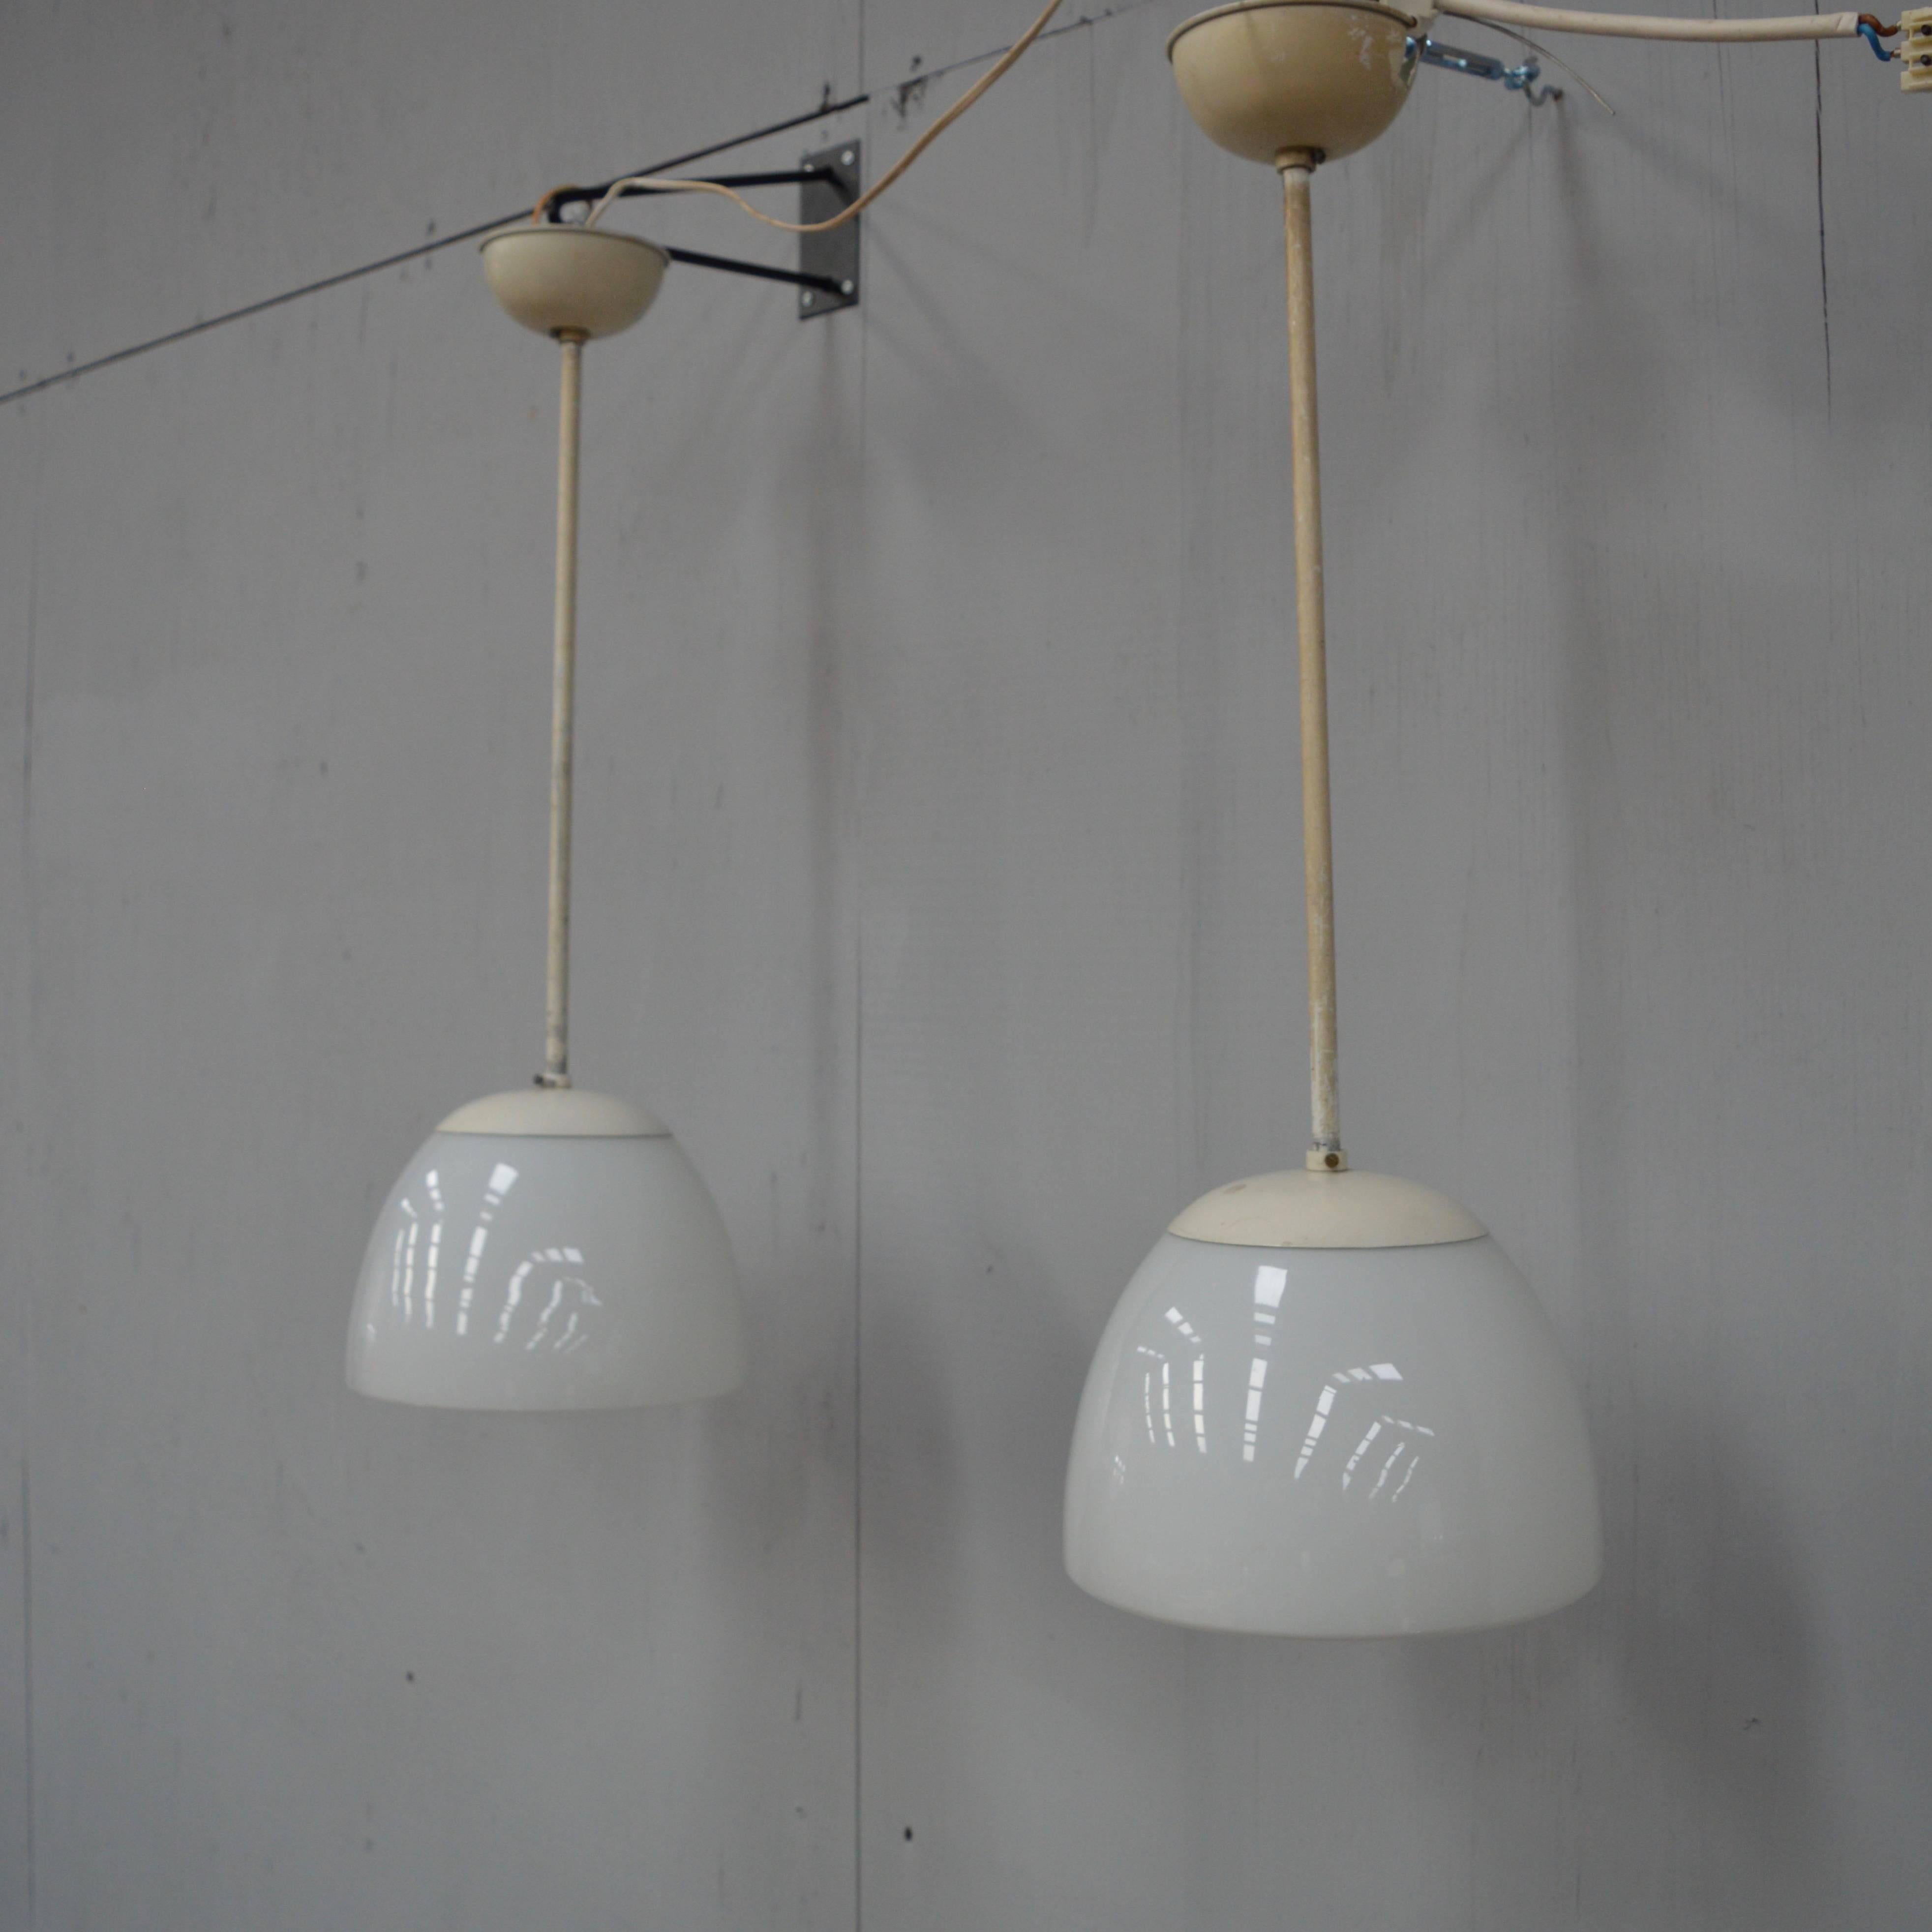 Mid-Century Modern Pair of Early Gispen Pendant Lamps, Netherlands, 1930s-1940s For Sale